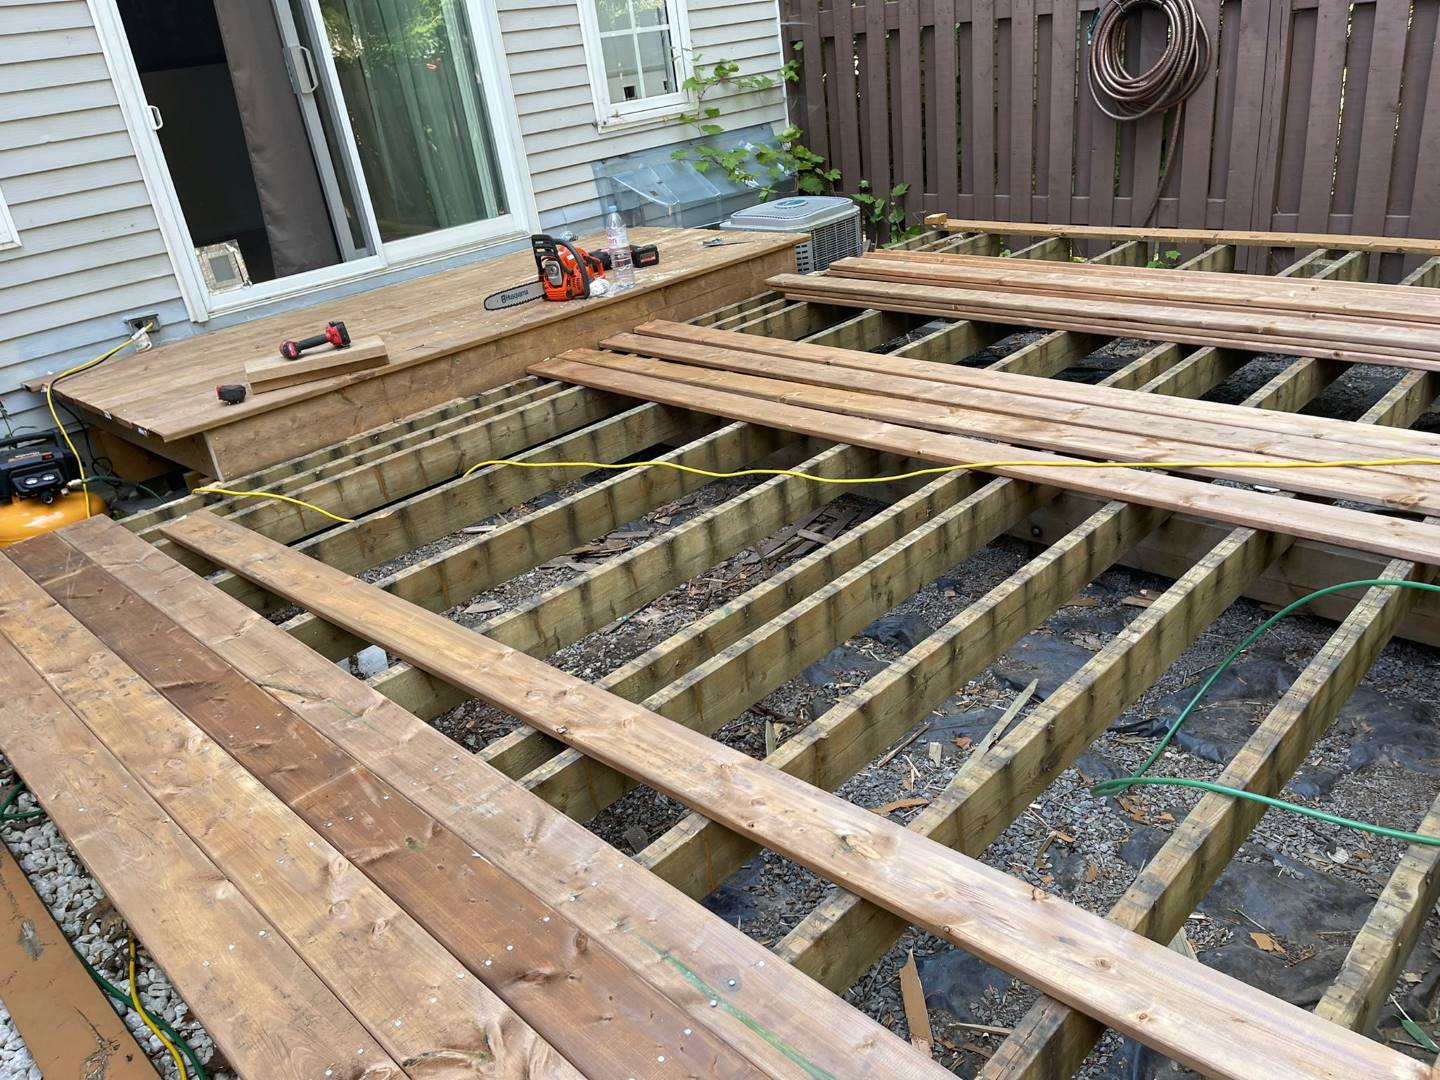 an early stage of a wooden deck construction, with the framework of laid out joists with already installed deck boards